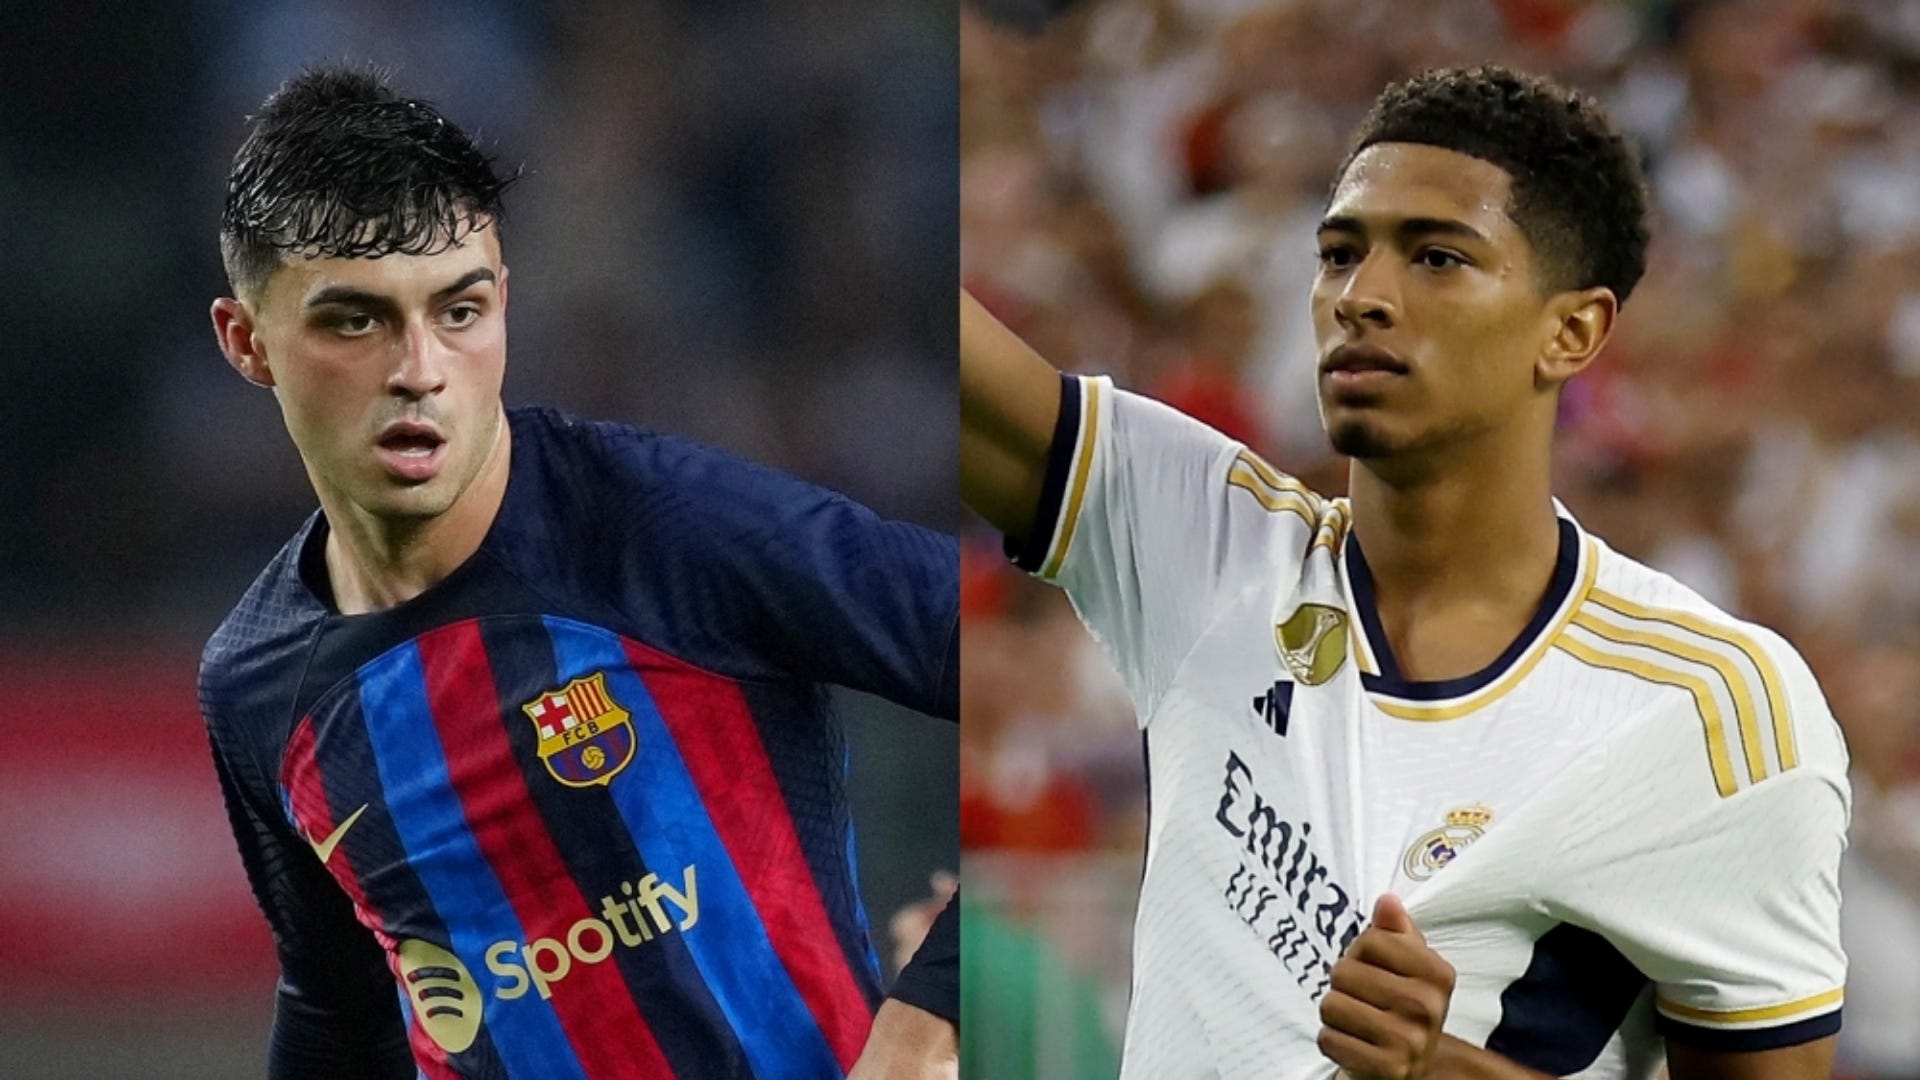 Barcelona vs Real Madrid Live stream, TV channel, kick-off time and where to watch Goal US